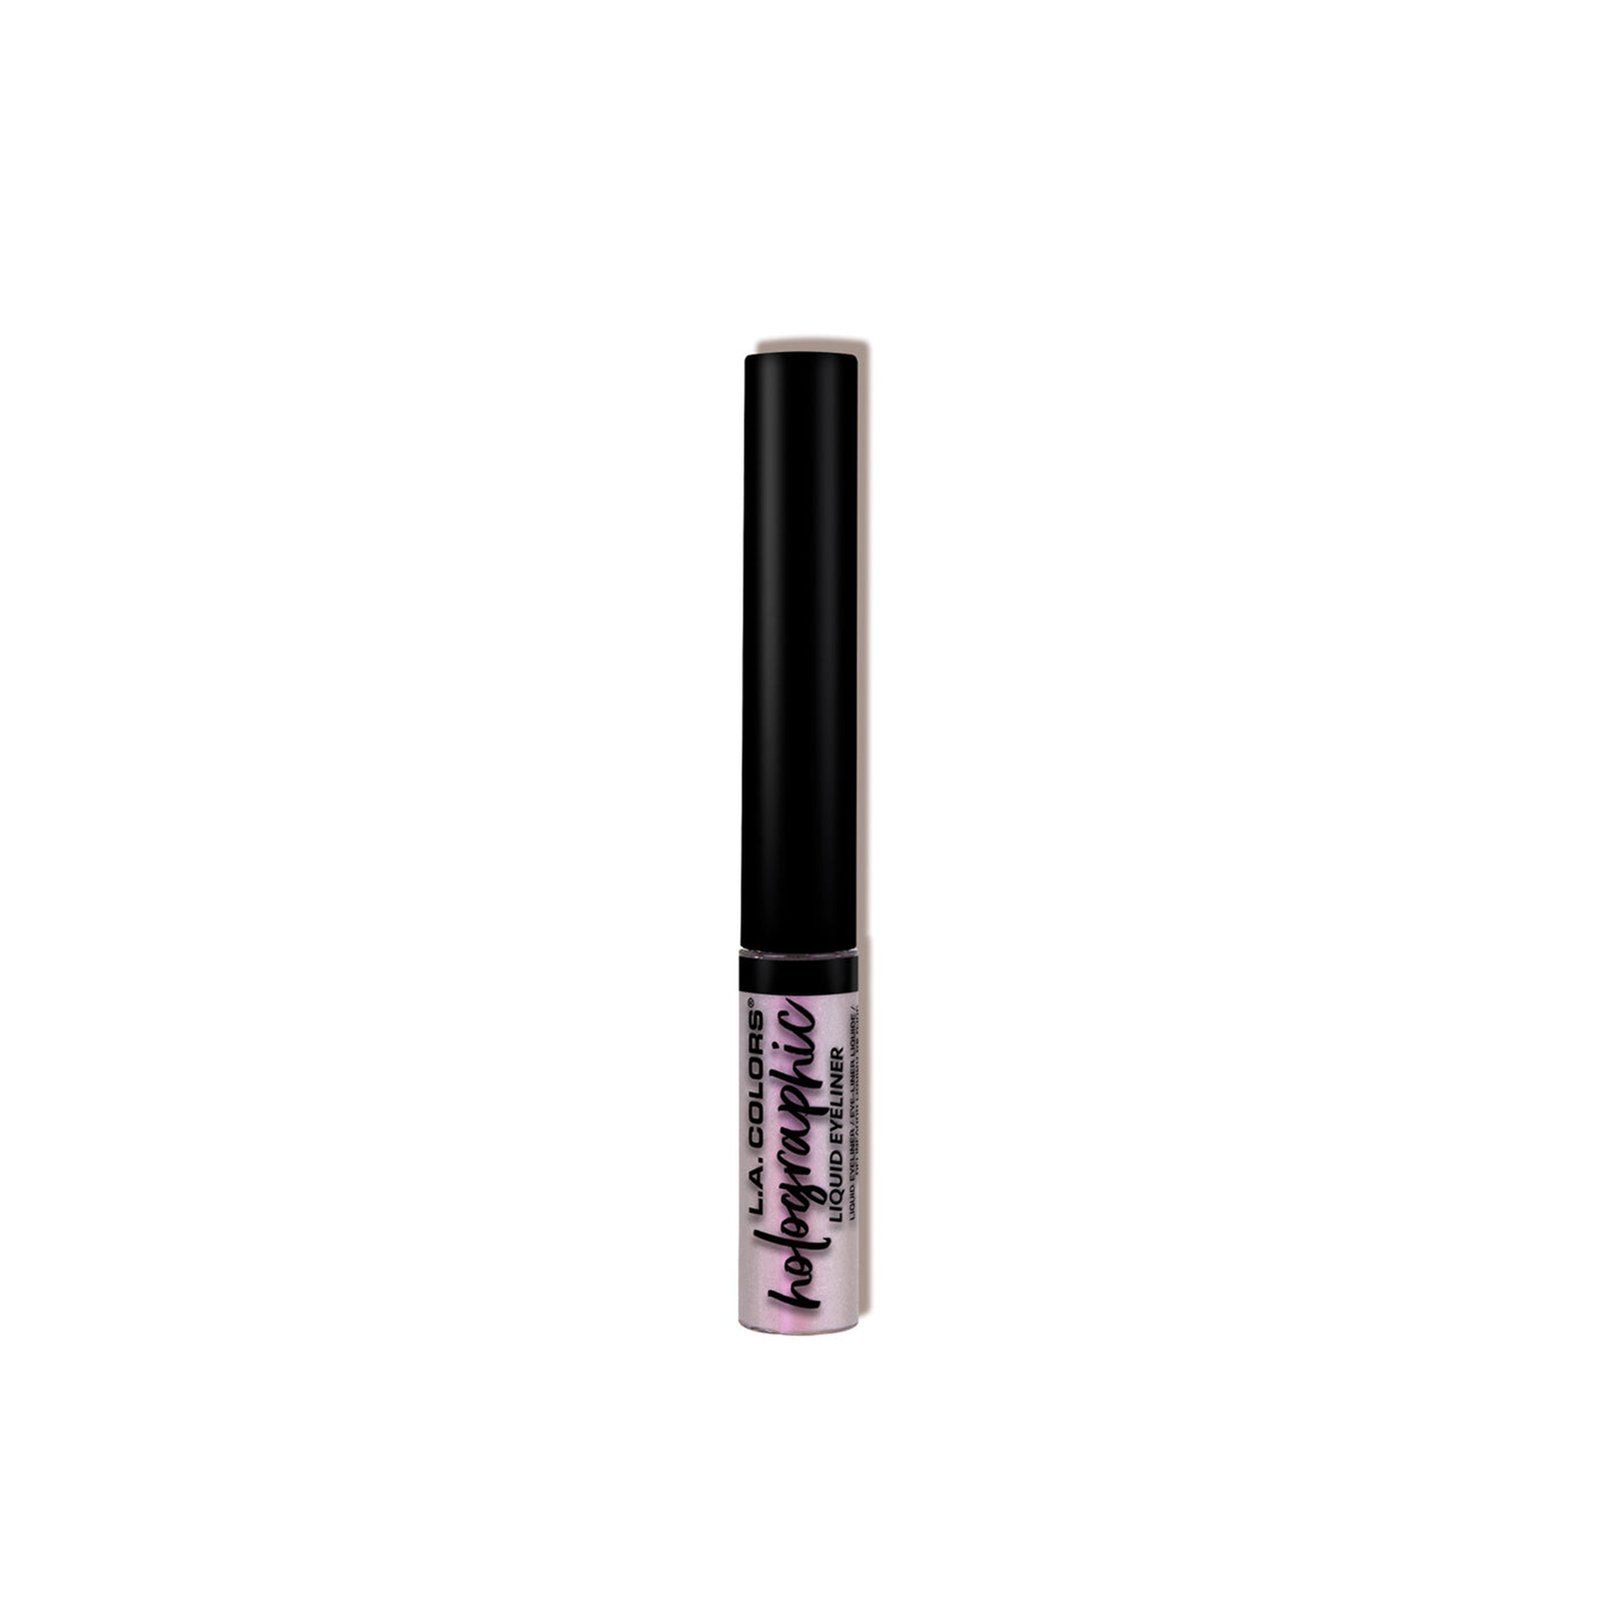 L.A. Colors Liquid Eyeliner Holographic CLE809 Holographic Cosmic Pink  5ml (0.17 fl oz)